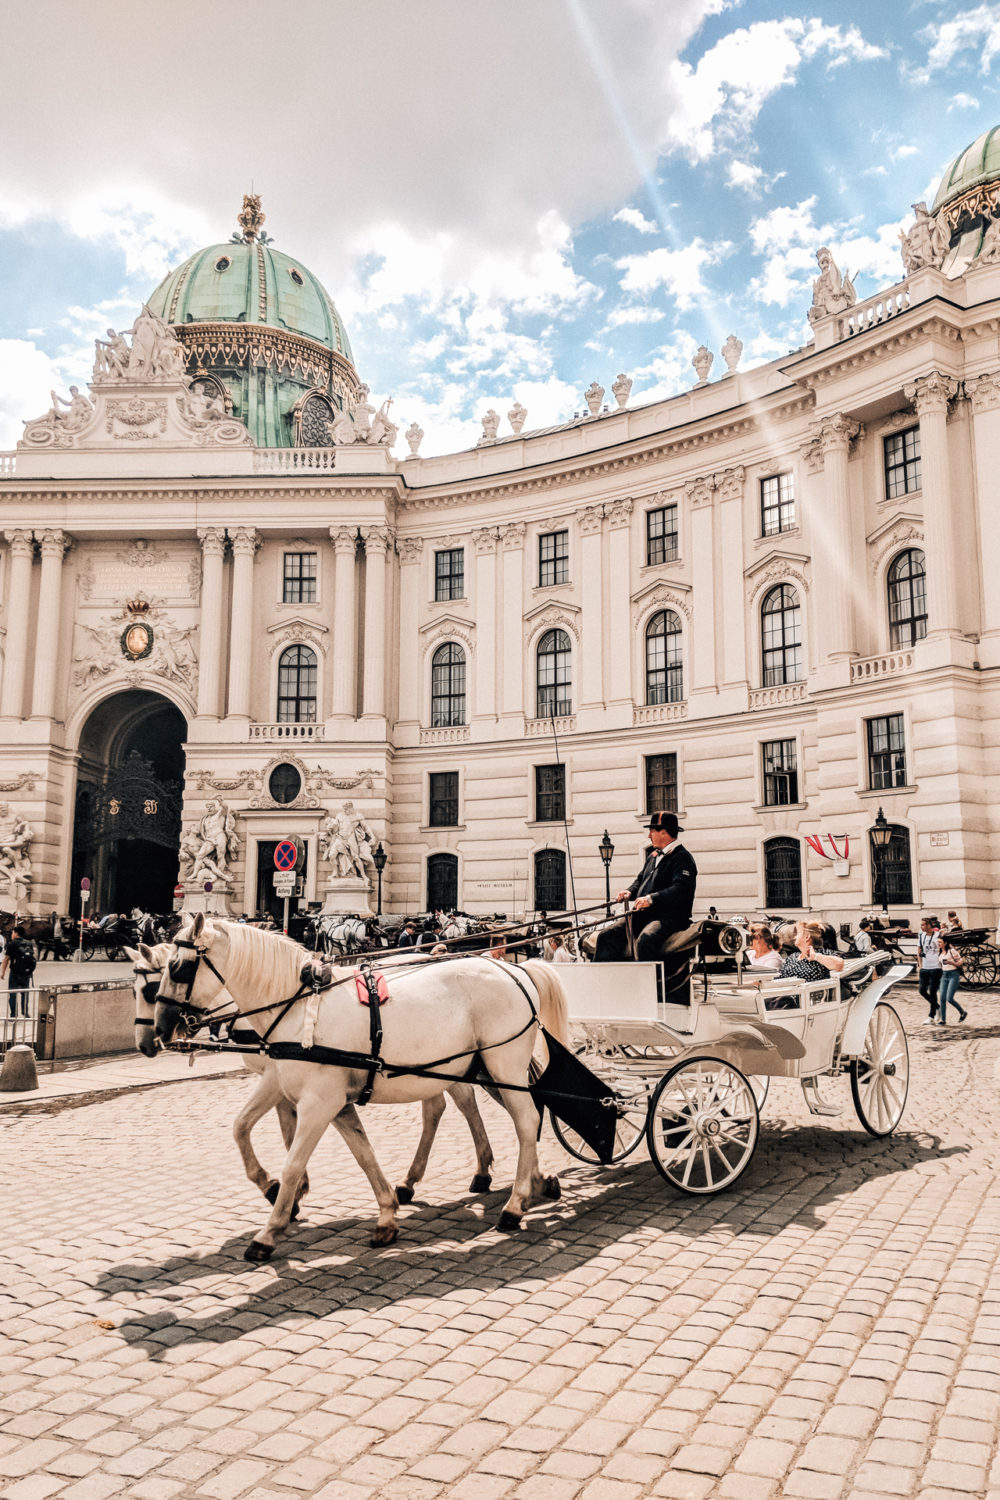 Spanish Riding School - Top Things to do in Vienna: a 4 Day Itinerary featured by popular Boston travel blogger, Sunny Coastlines